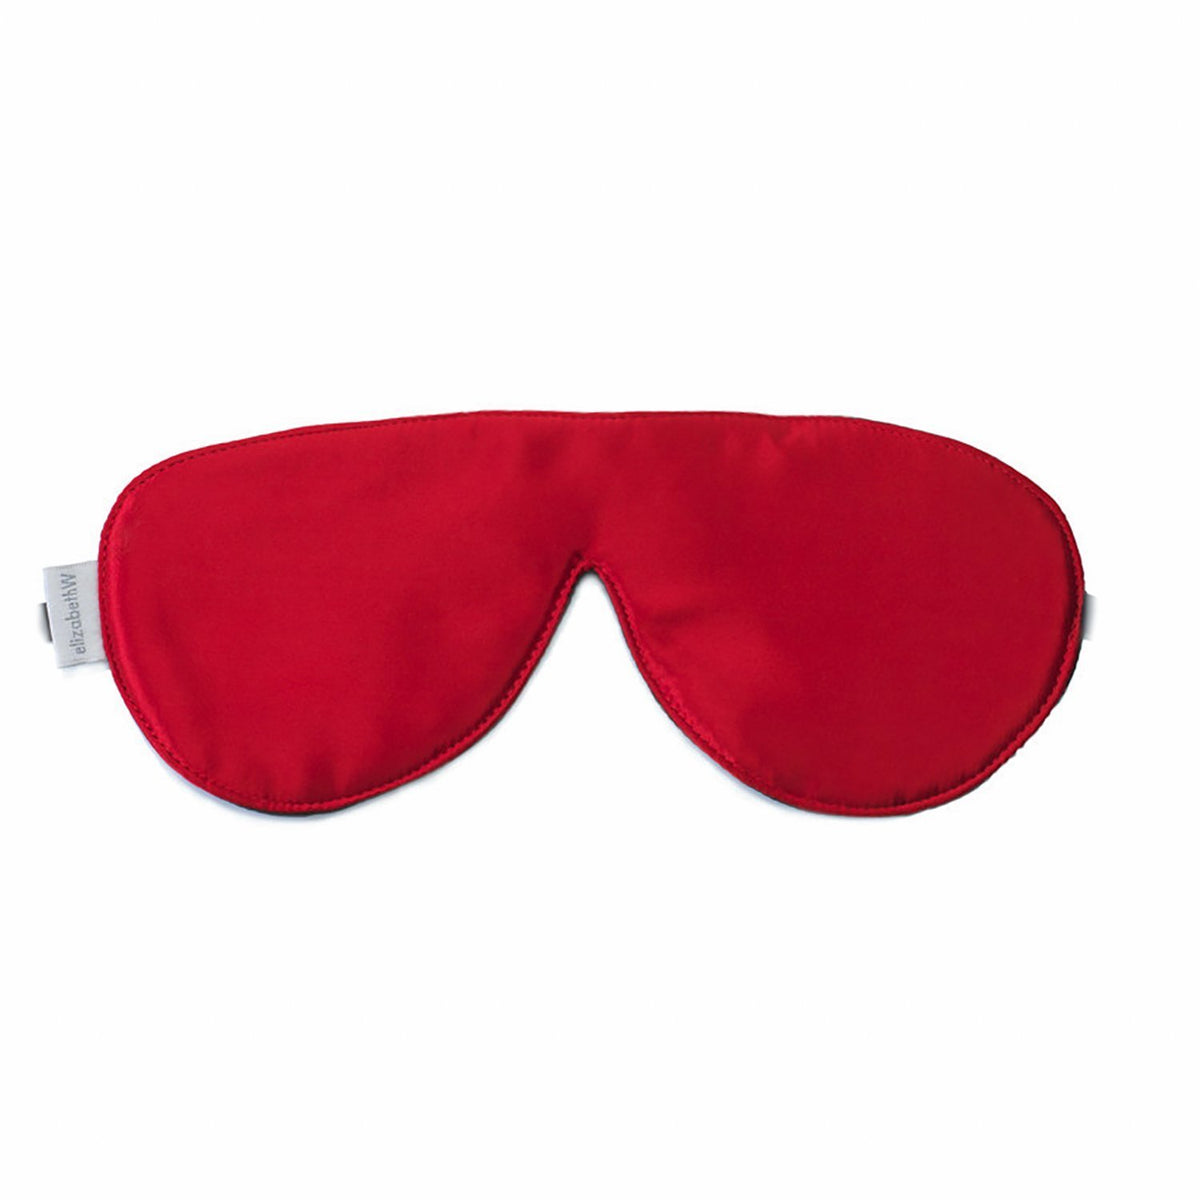 A bright red Elizabeth W Silk Sleep Mask isolated on a white background. The mask is smooth with a contoured design to fit comfortably over the eyes and has an elastic band for securing it in place.